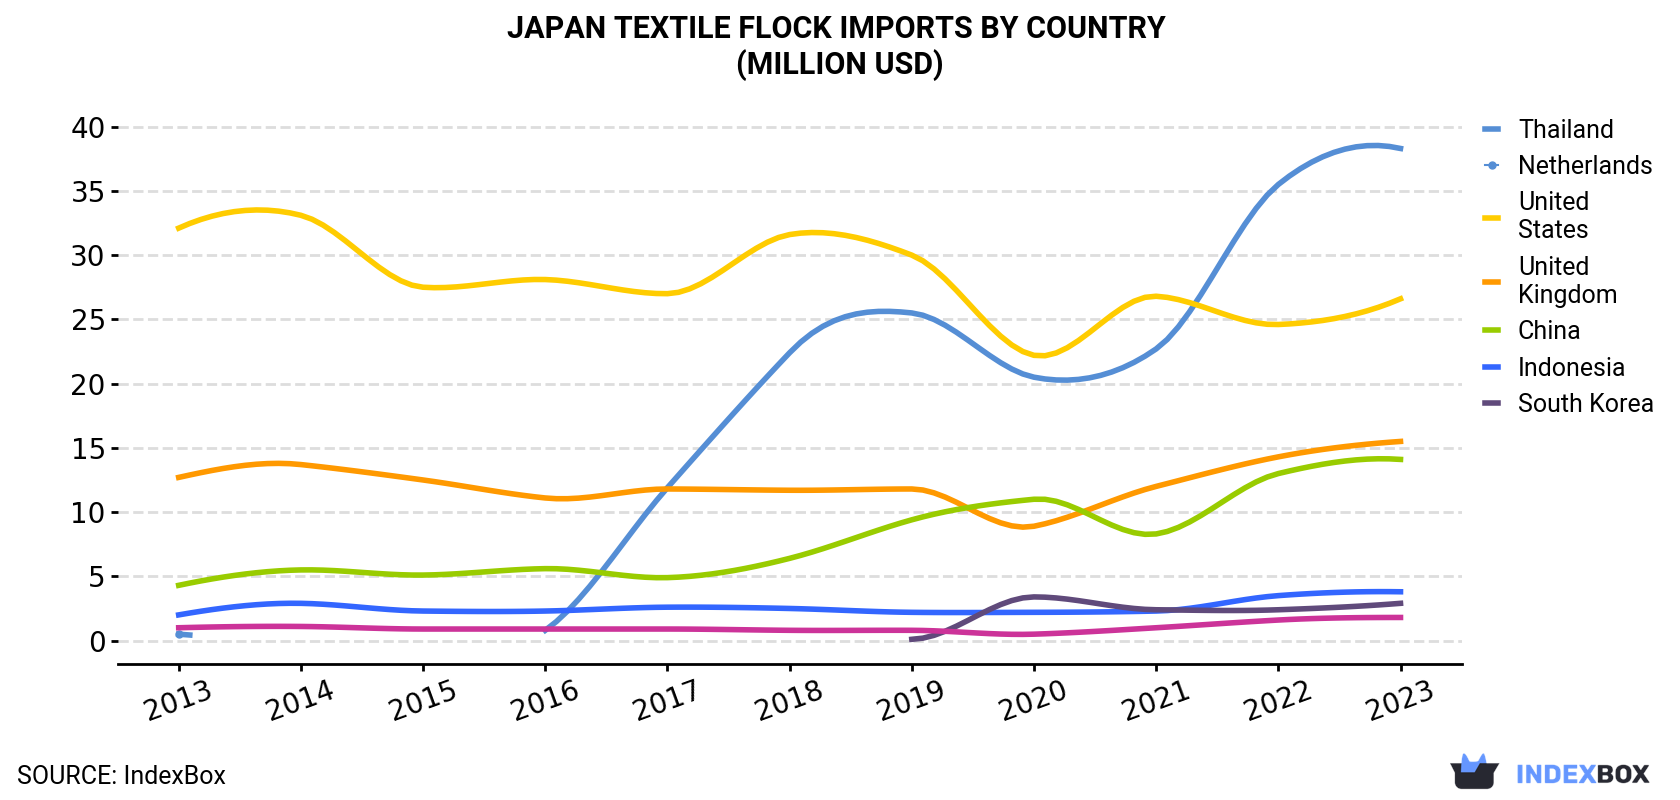 Japan Textile Flock Imports By Country (Million USD)